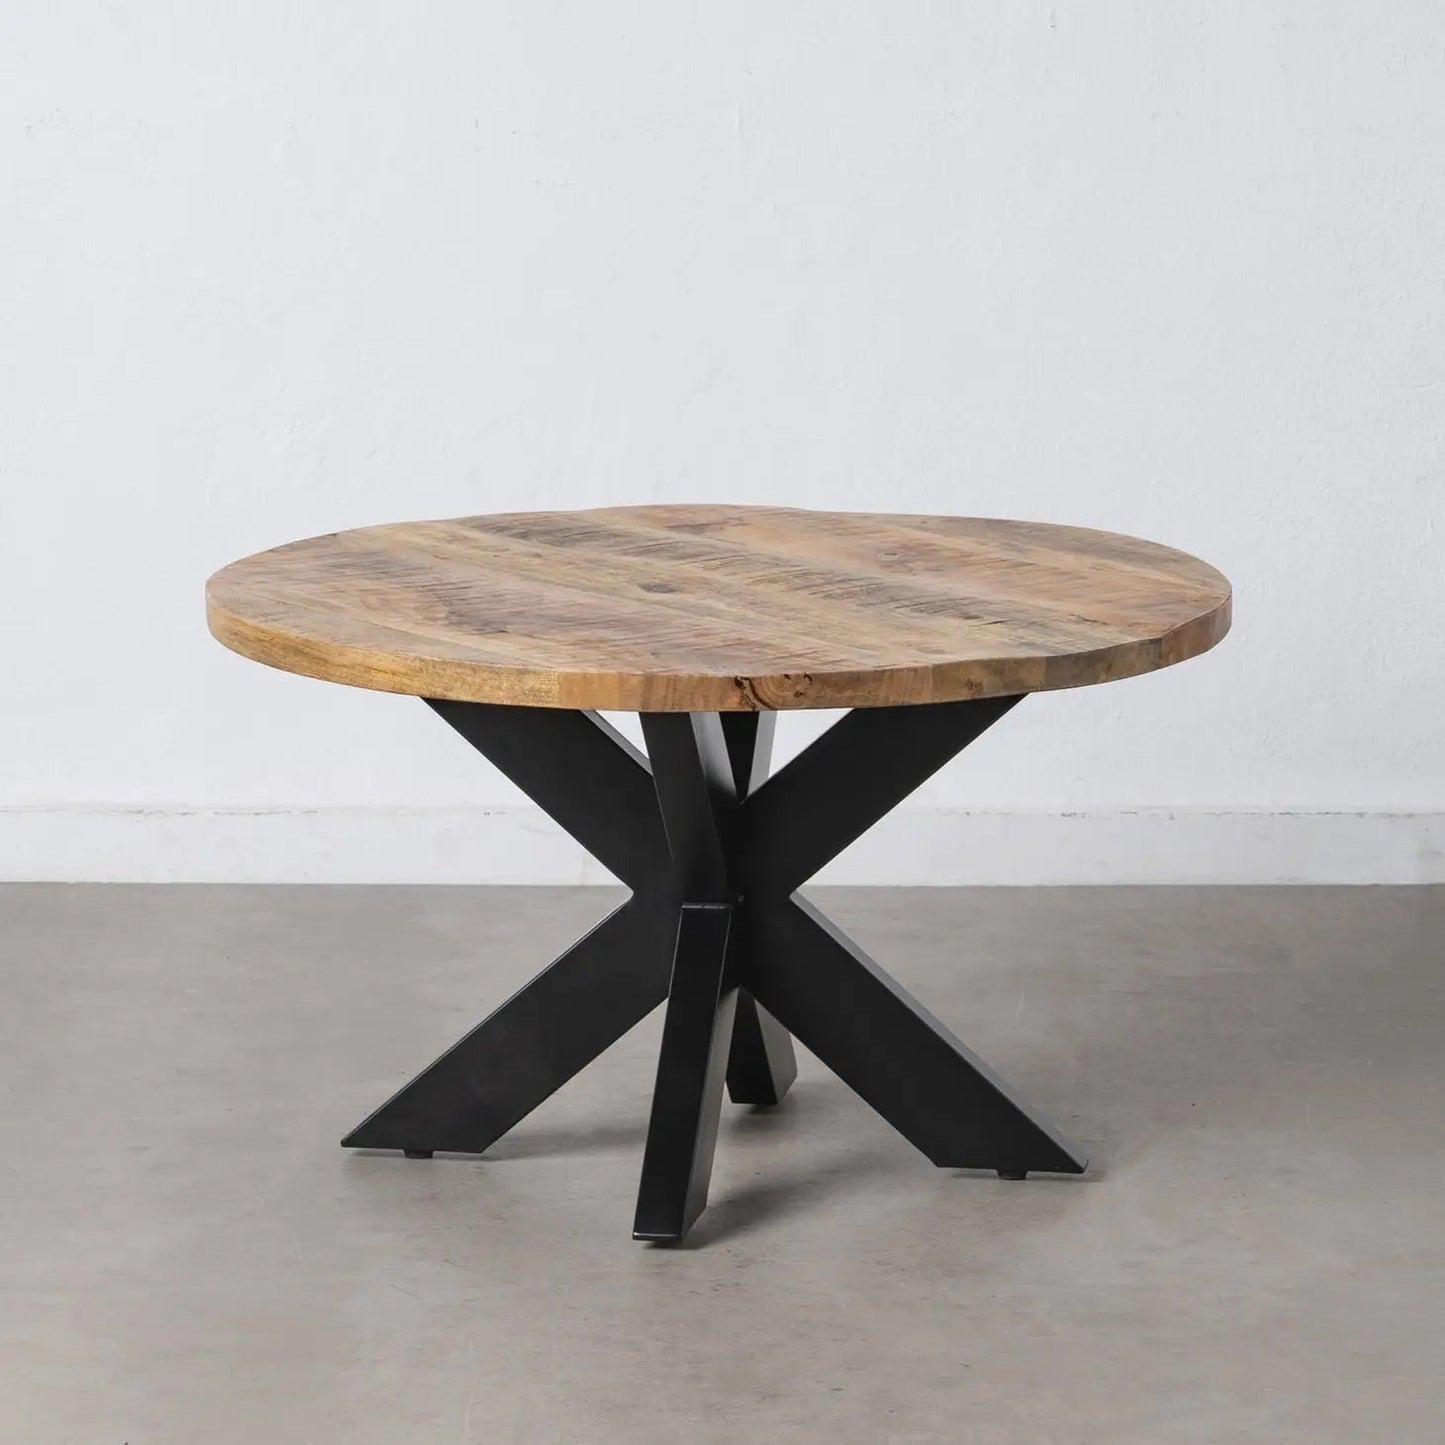 31.5" Solid Mango Wood Round Natural Coffee Table - Black Iron Legs